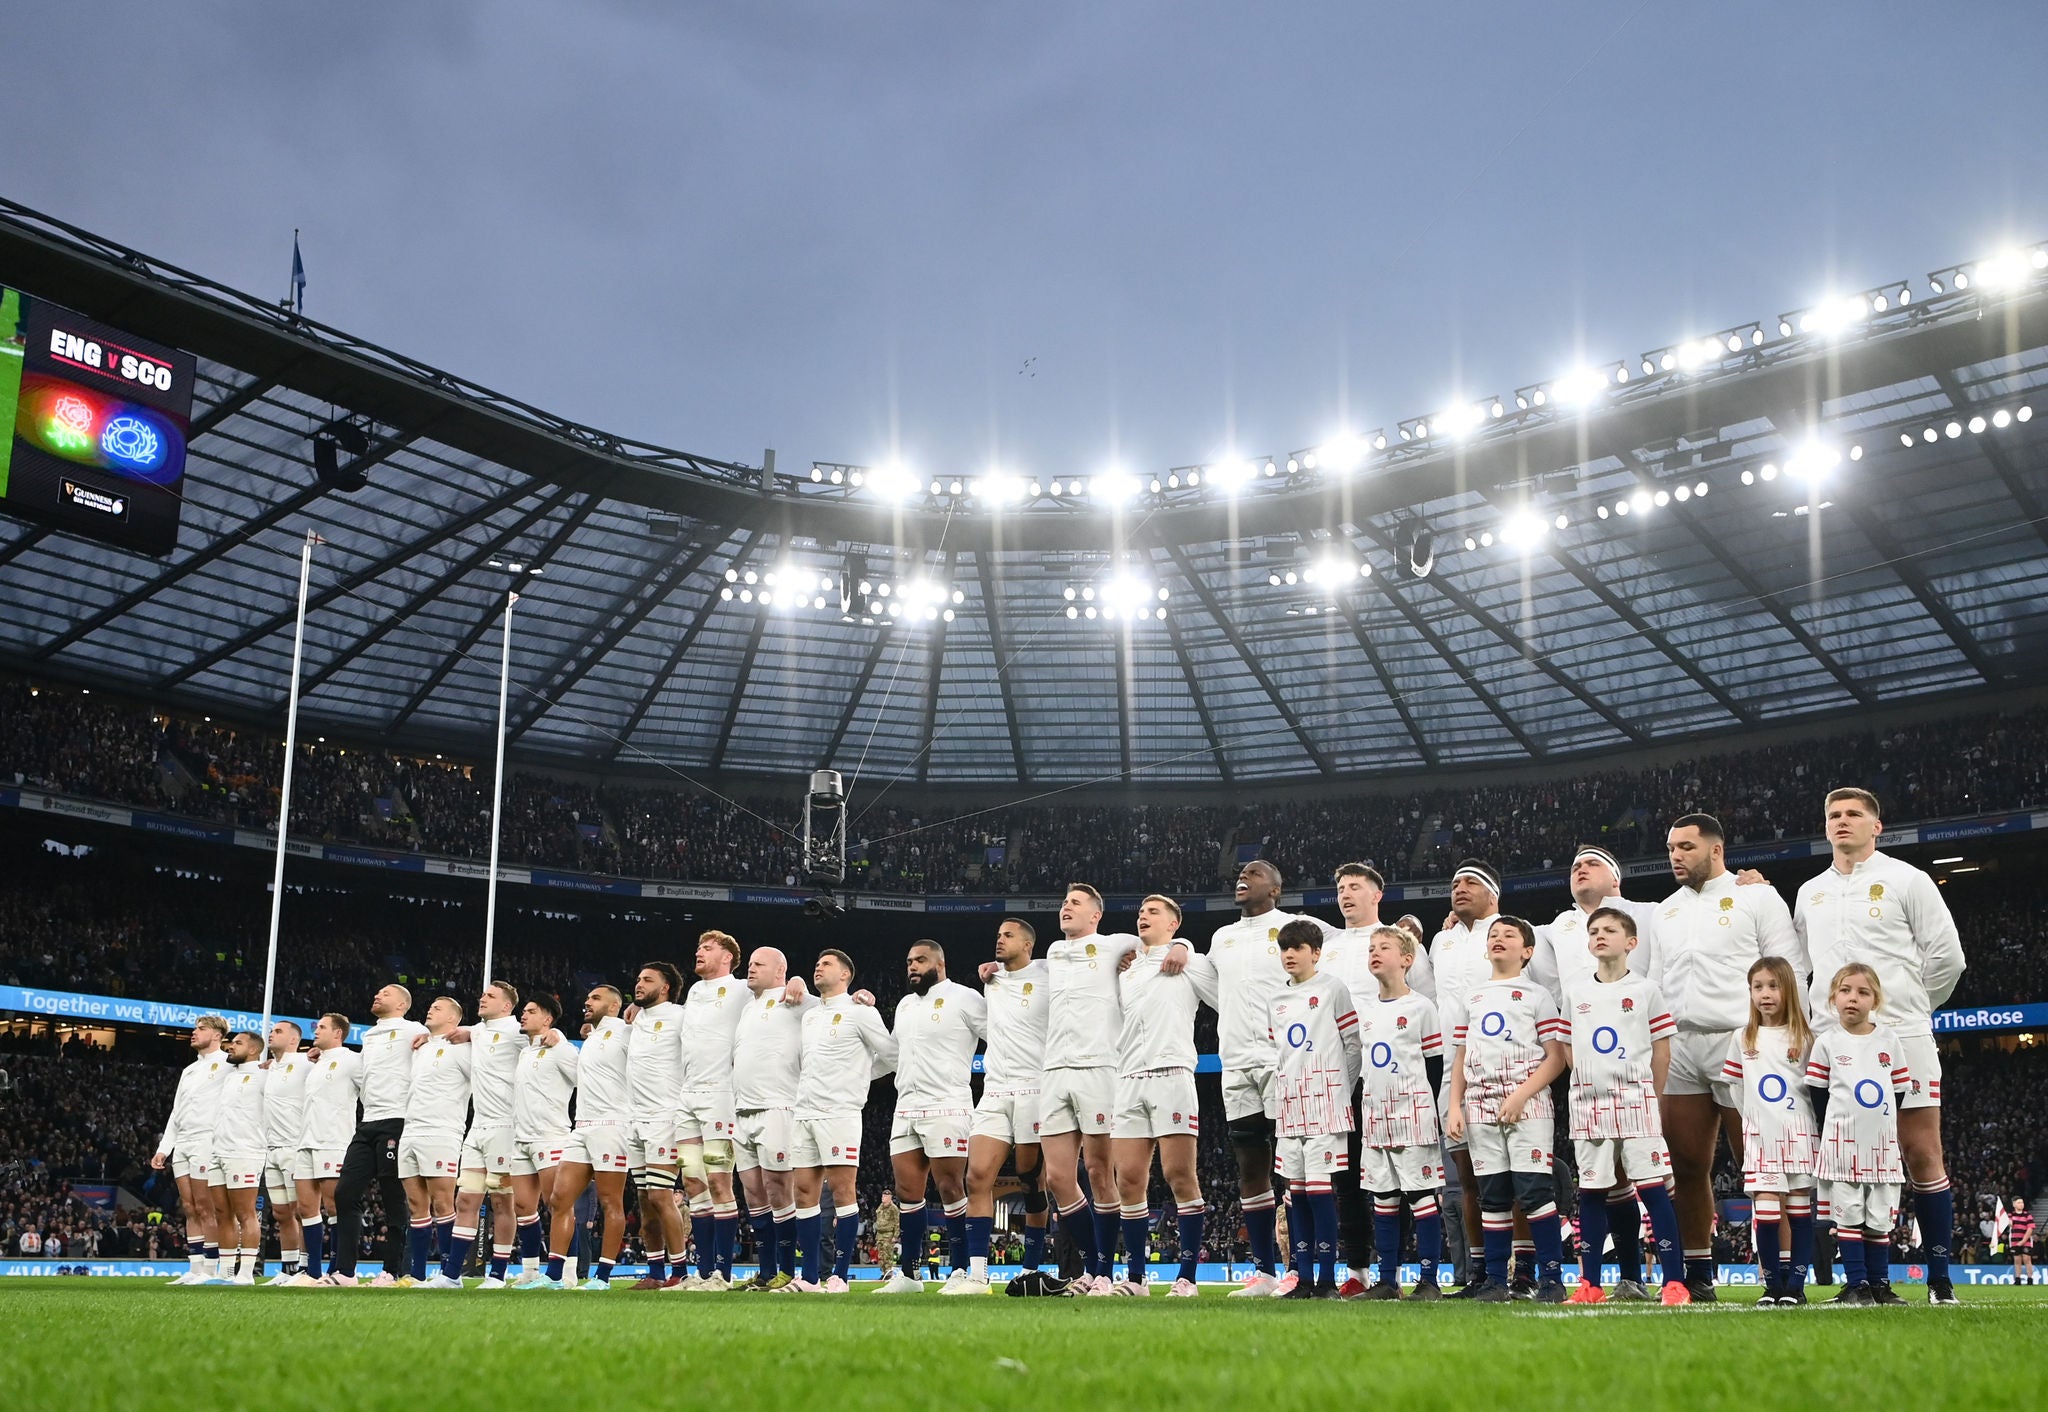 LONDON, ENGLAND - NOVEMBER 19: Maro Itoje of England walks out onto the field after half time during the Autumn International match between England and New Zealand at Twickenham Stadium on November 19, 2022 in London, England. (Photo by Alex Davidson - RFU/The RFU Collection via Getty Images)